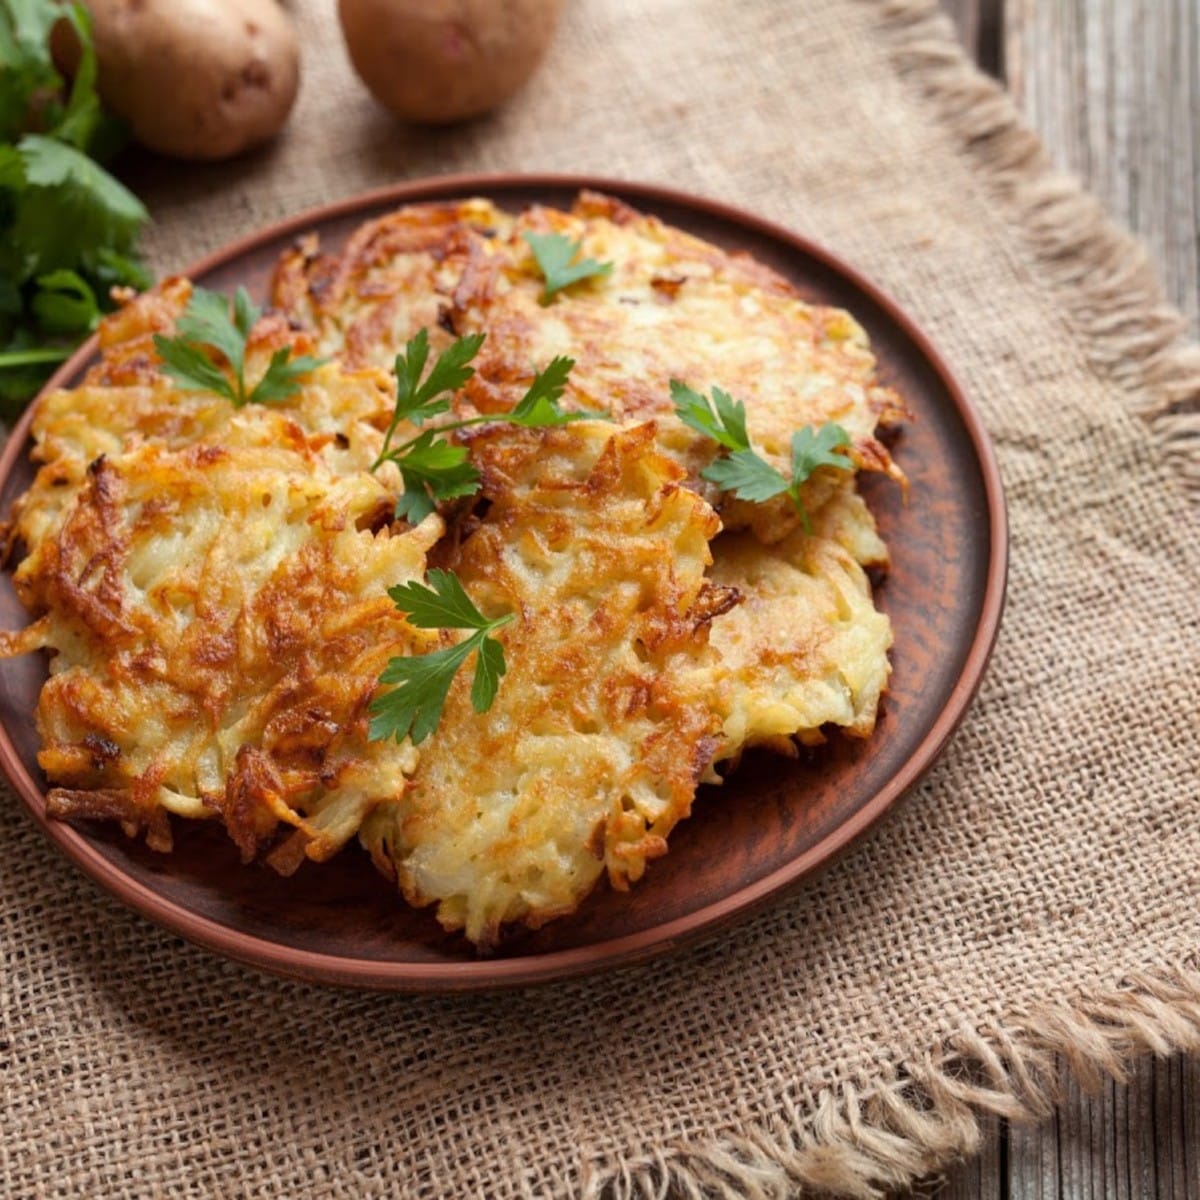 How To Make Potato Pancakes Absolutely Delicious With 5 Ingredients